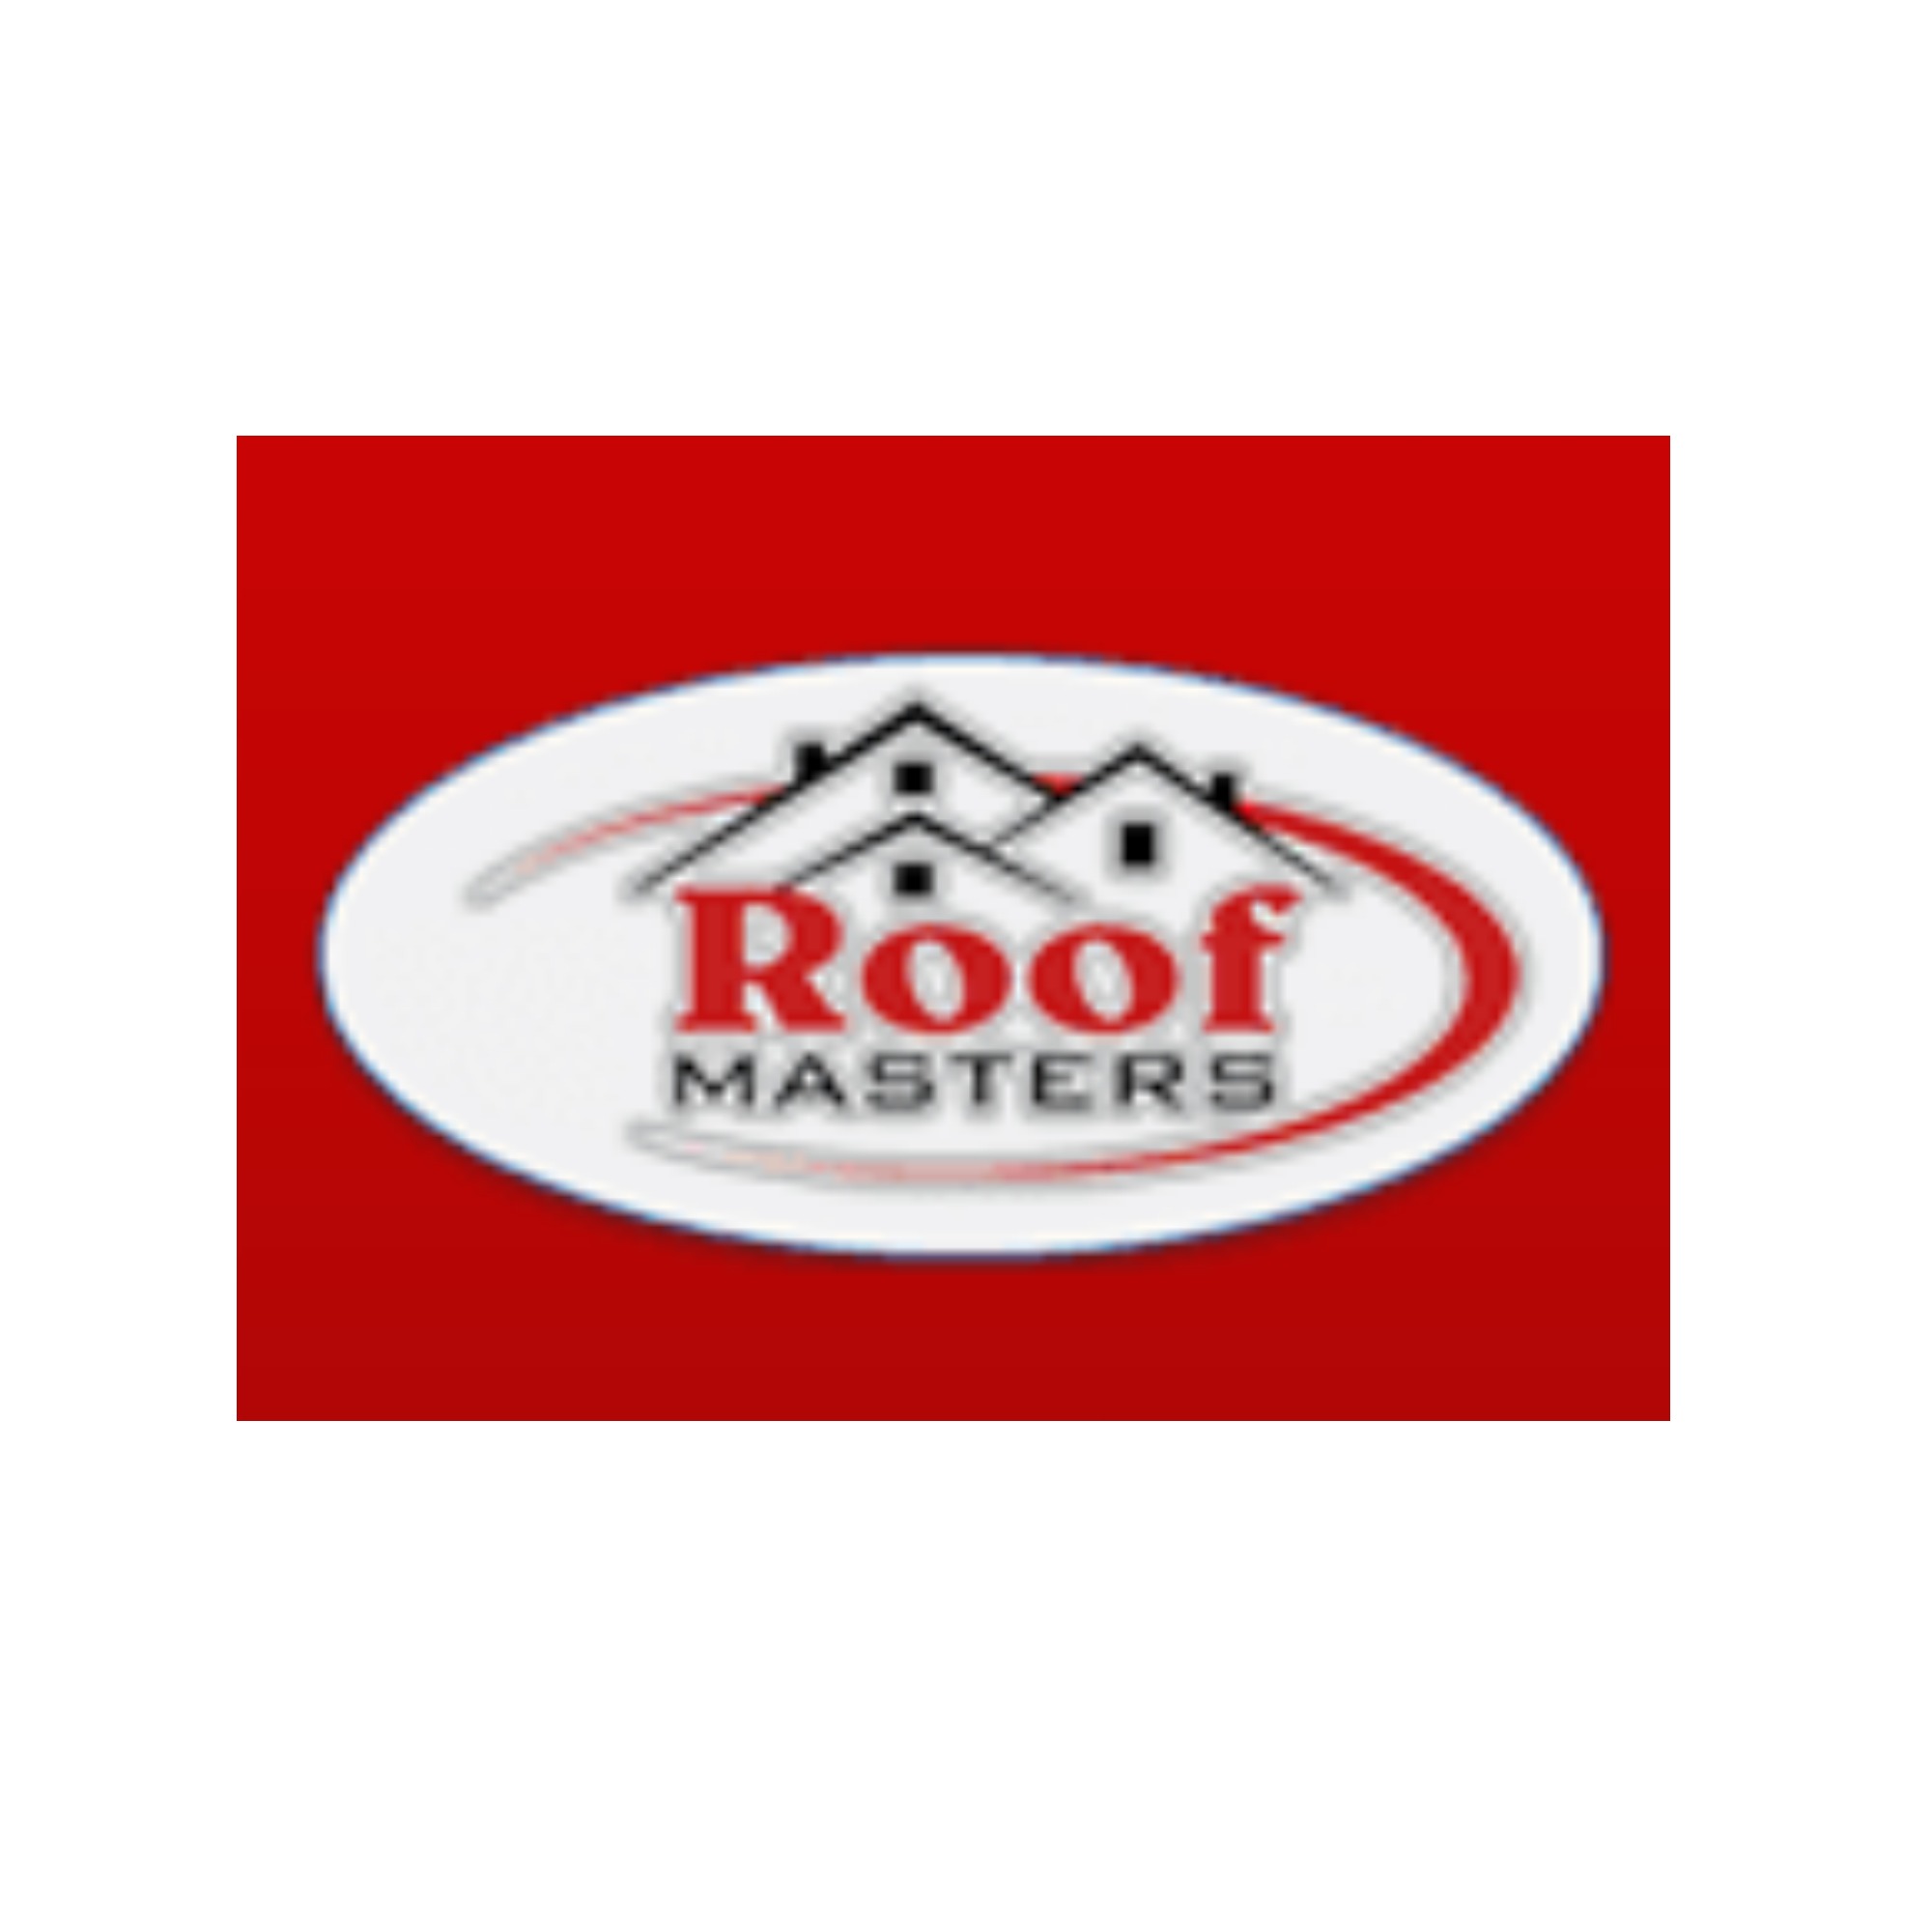 Roof Masters - Rockville, MD 20850 - (301)230-7663 | ShowMeLocal.com